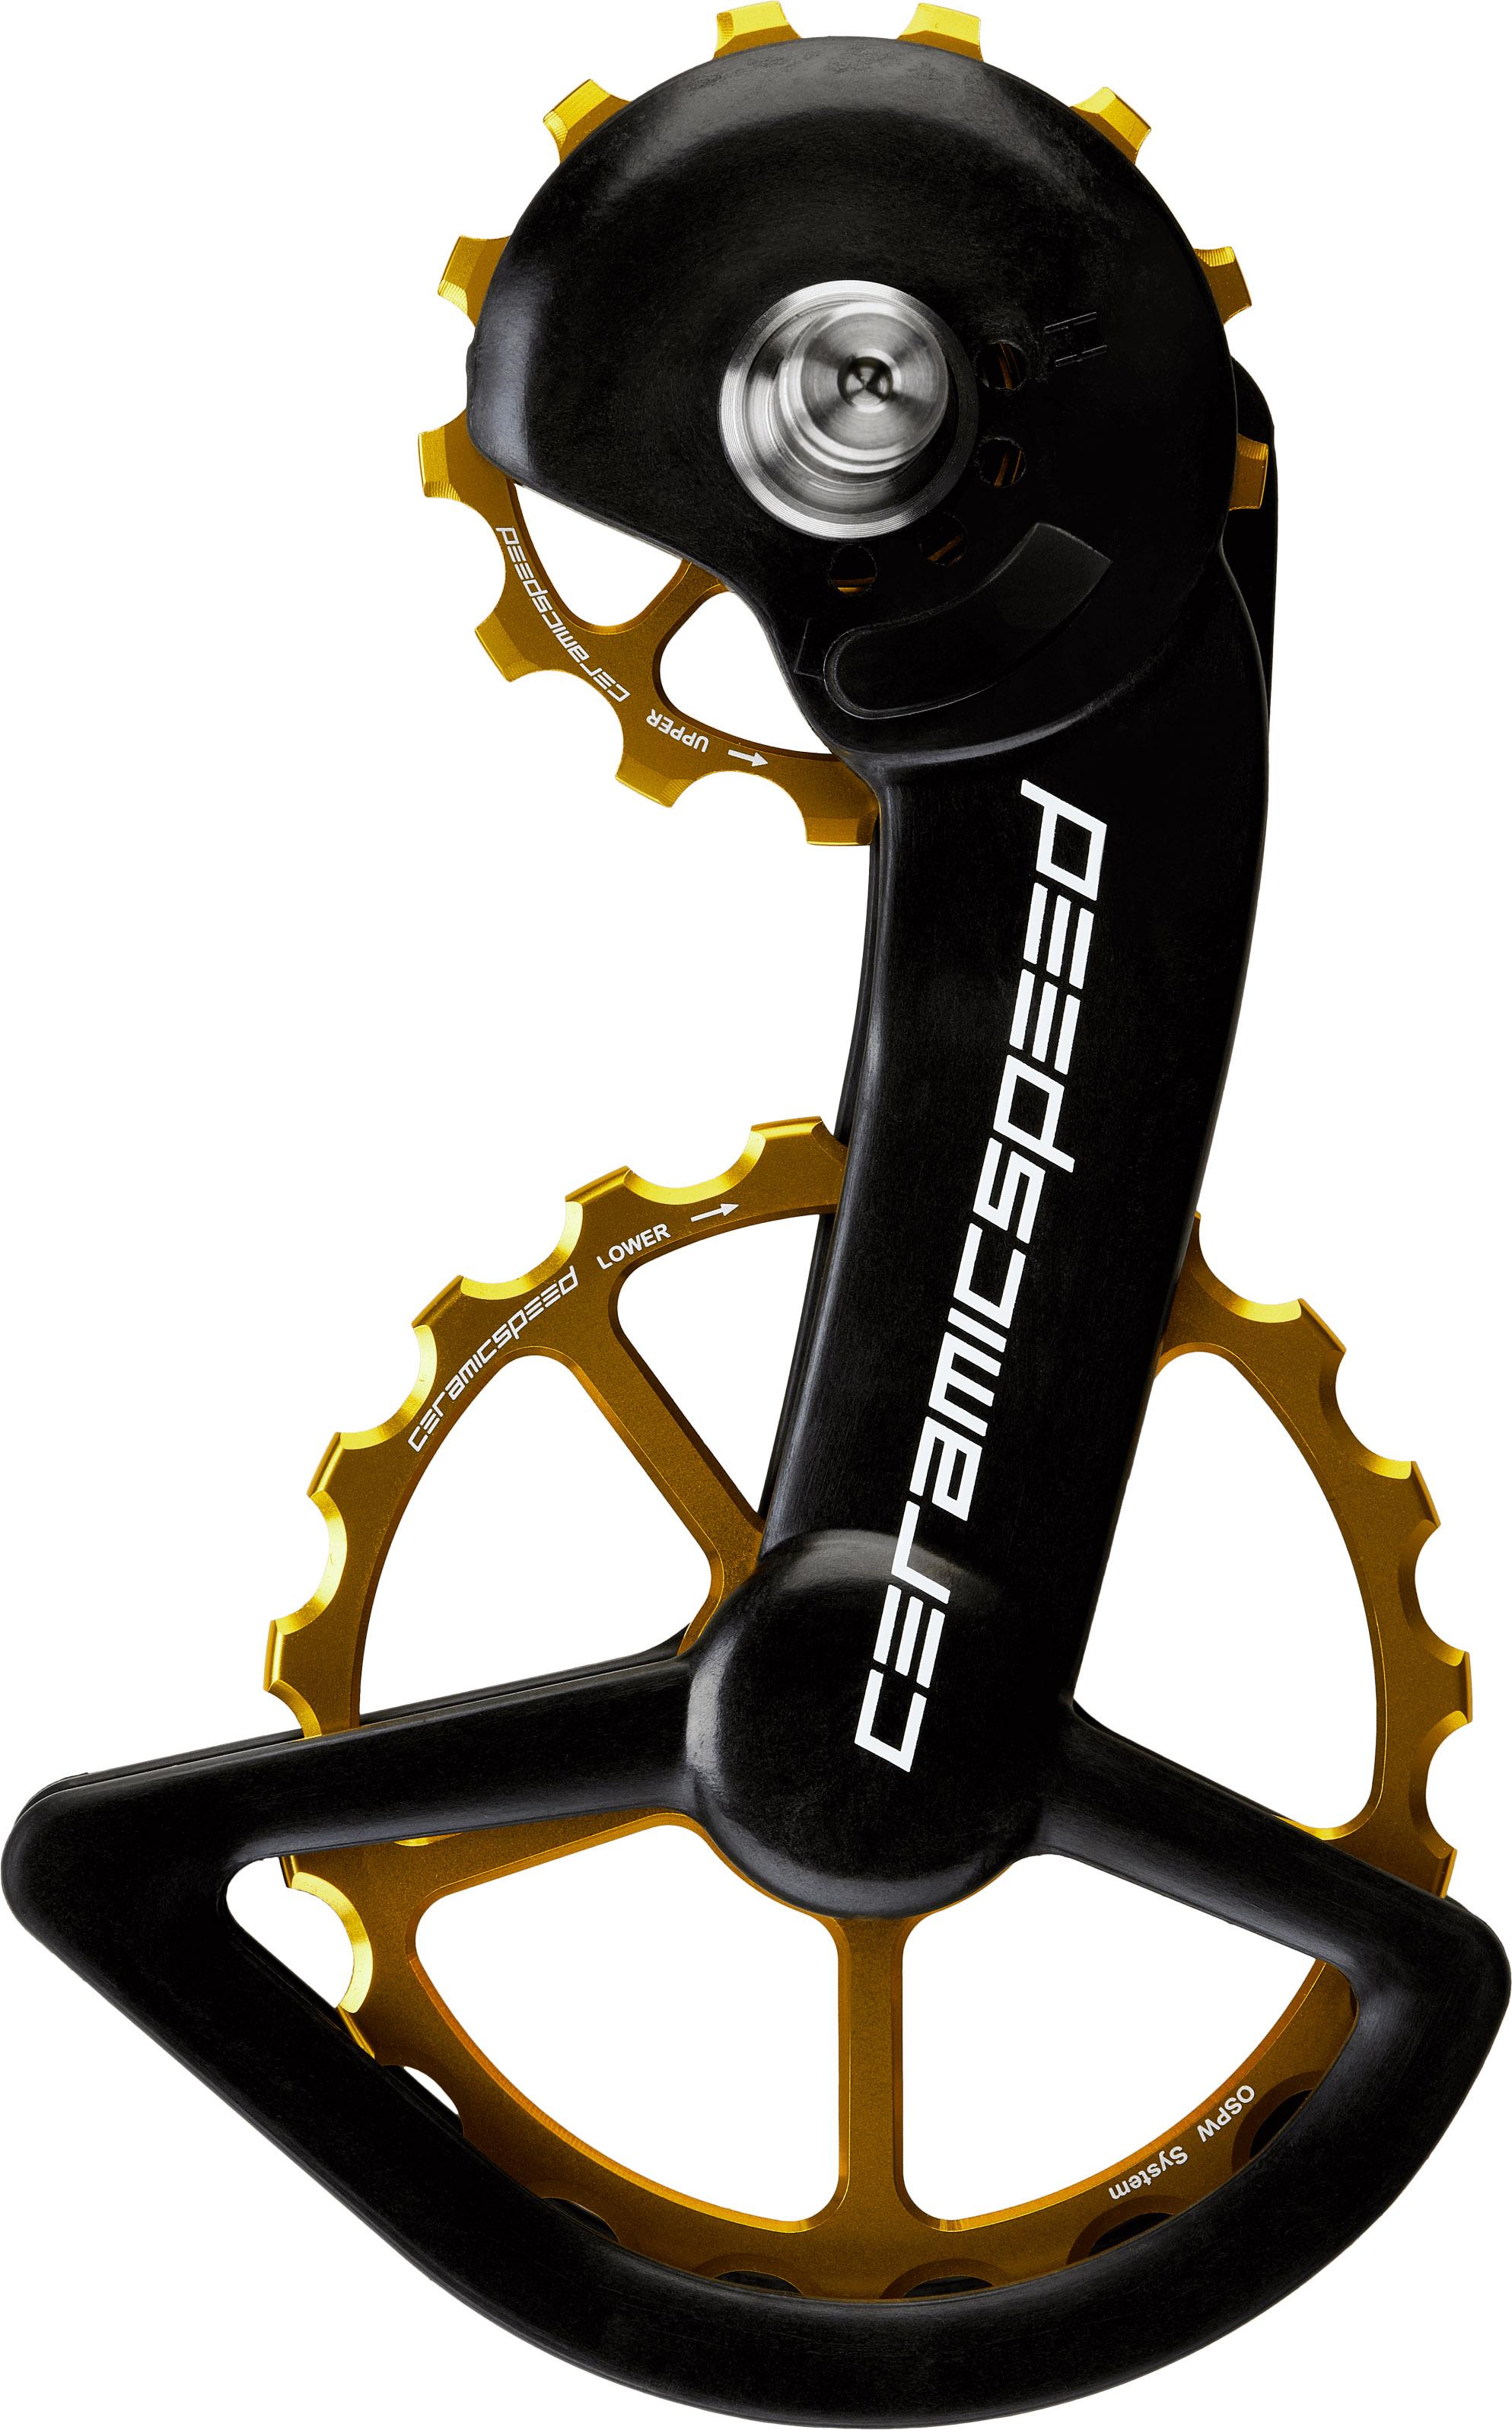 Ceramicspeed Oversized Pulley Wheel System - Gold